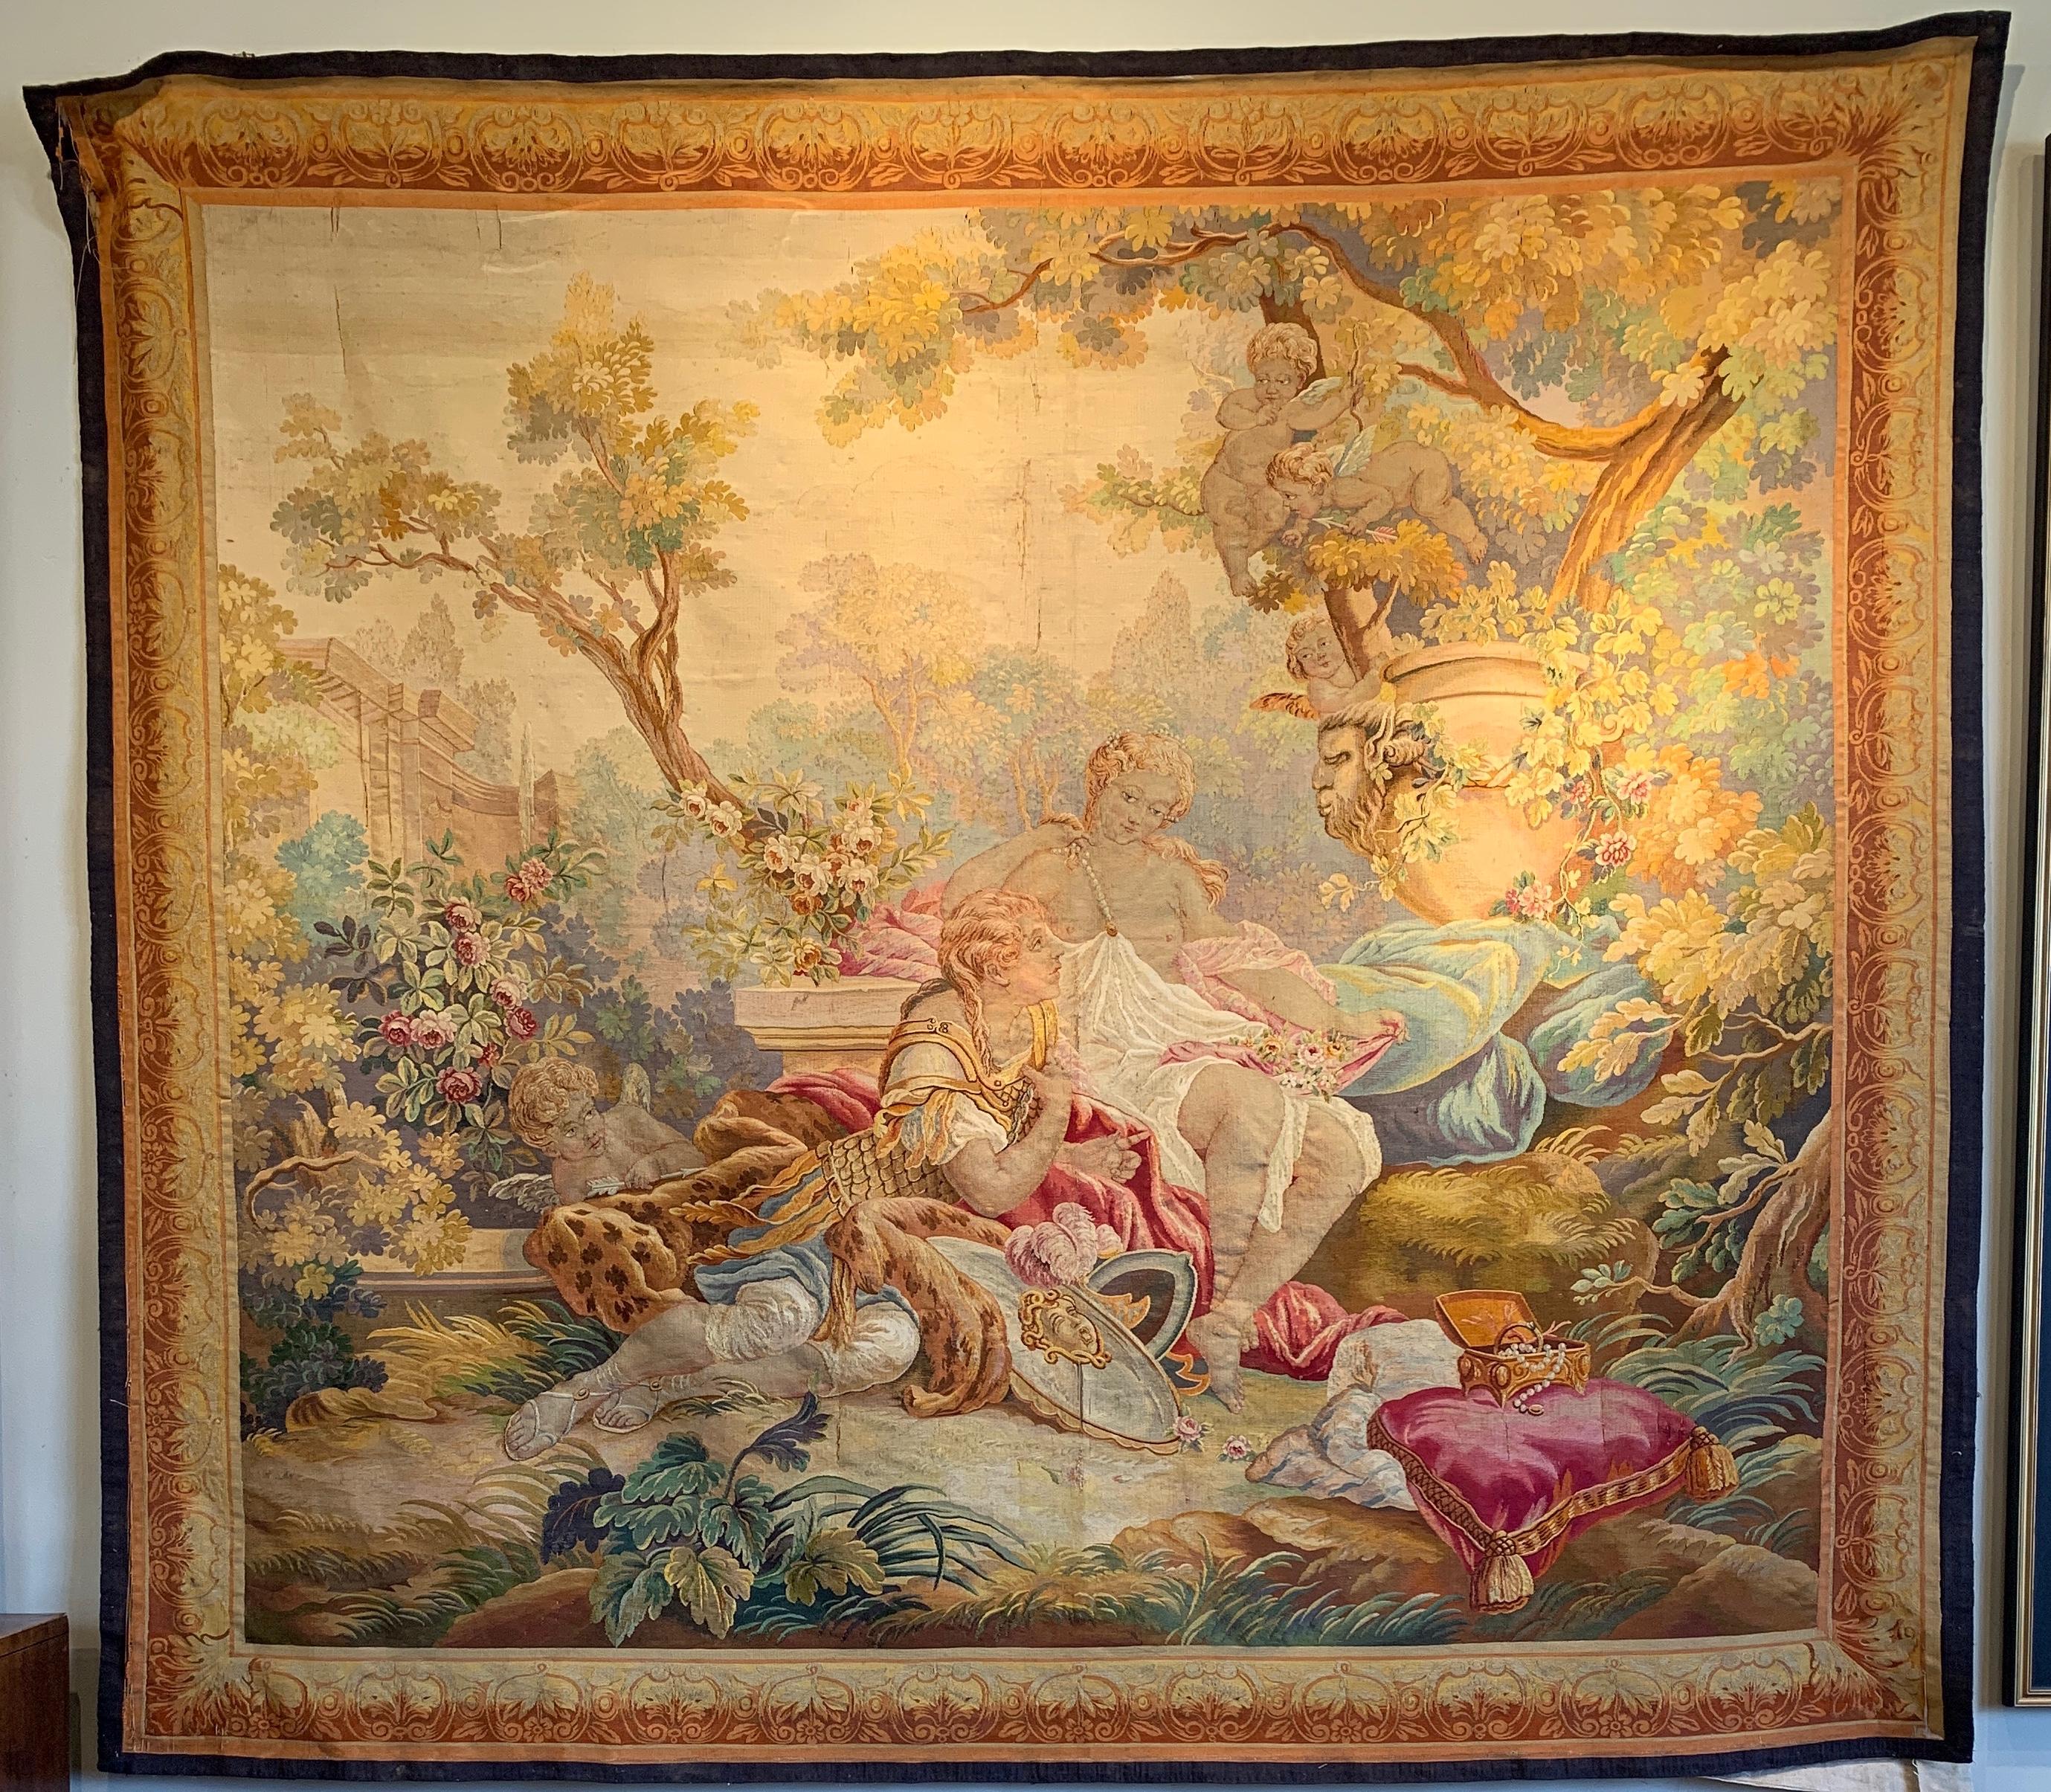 A large and exquisitely crafted French Aubusson wall tapestry woven in the mid-19th century in the opulent Rococo taste. Aubusson, renowned for its handwoven carpets, crafted fine tapestries such as this to adorn noble and royal residences. This